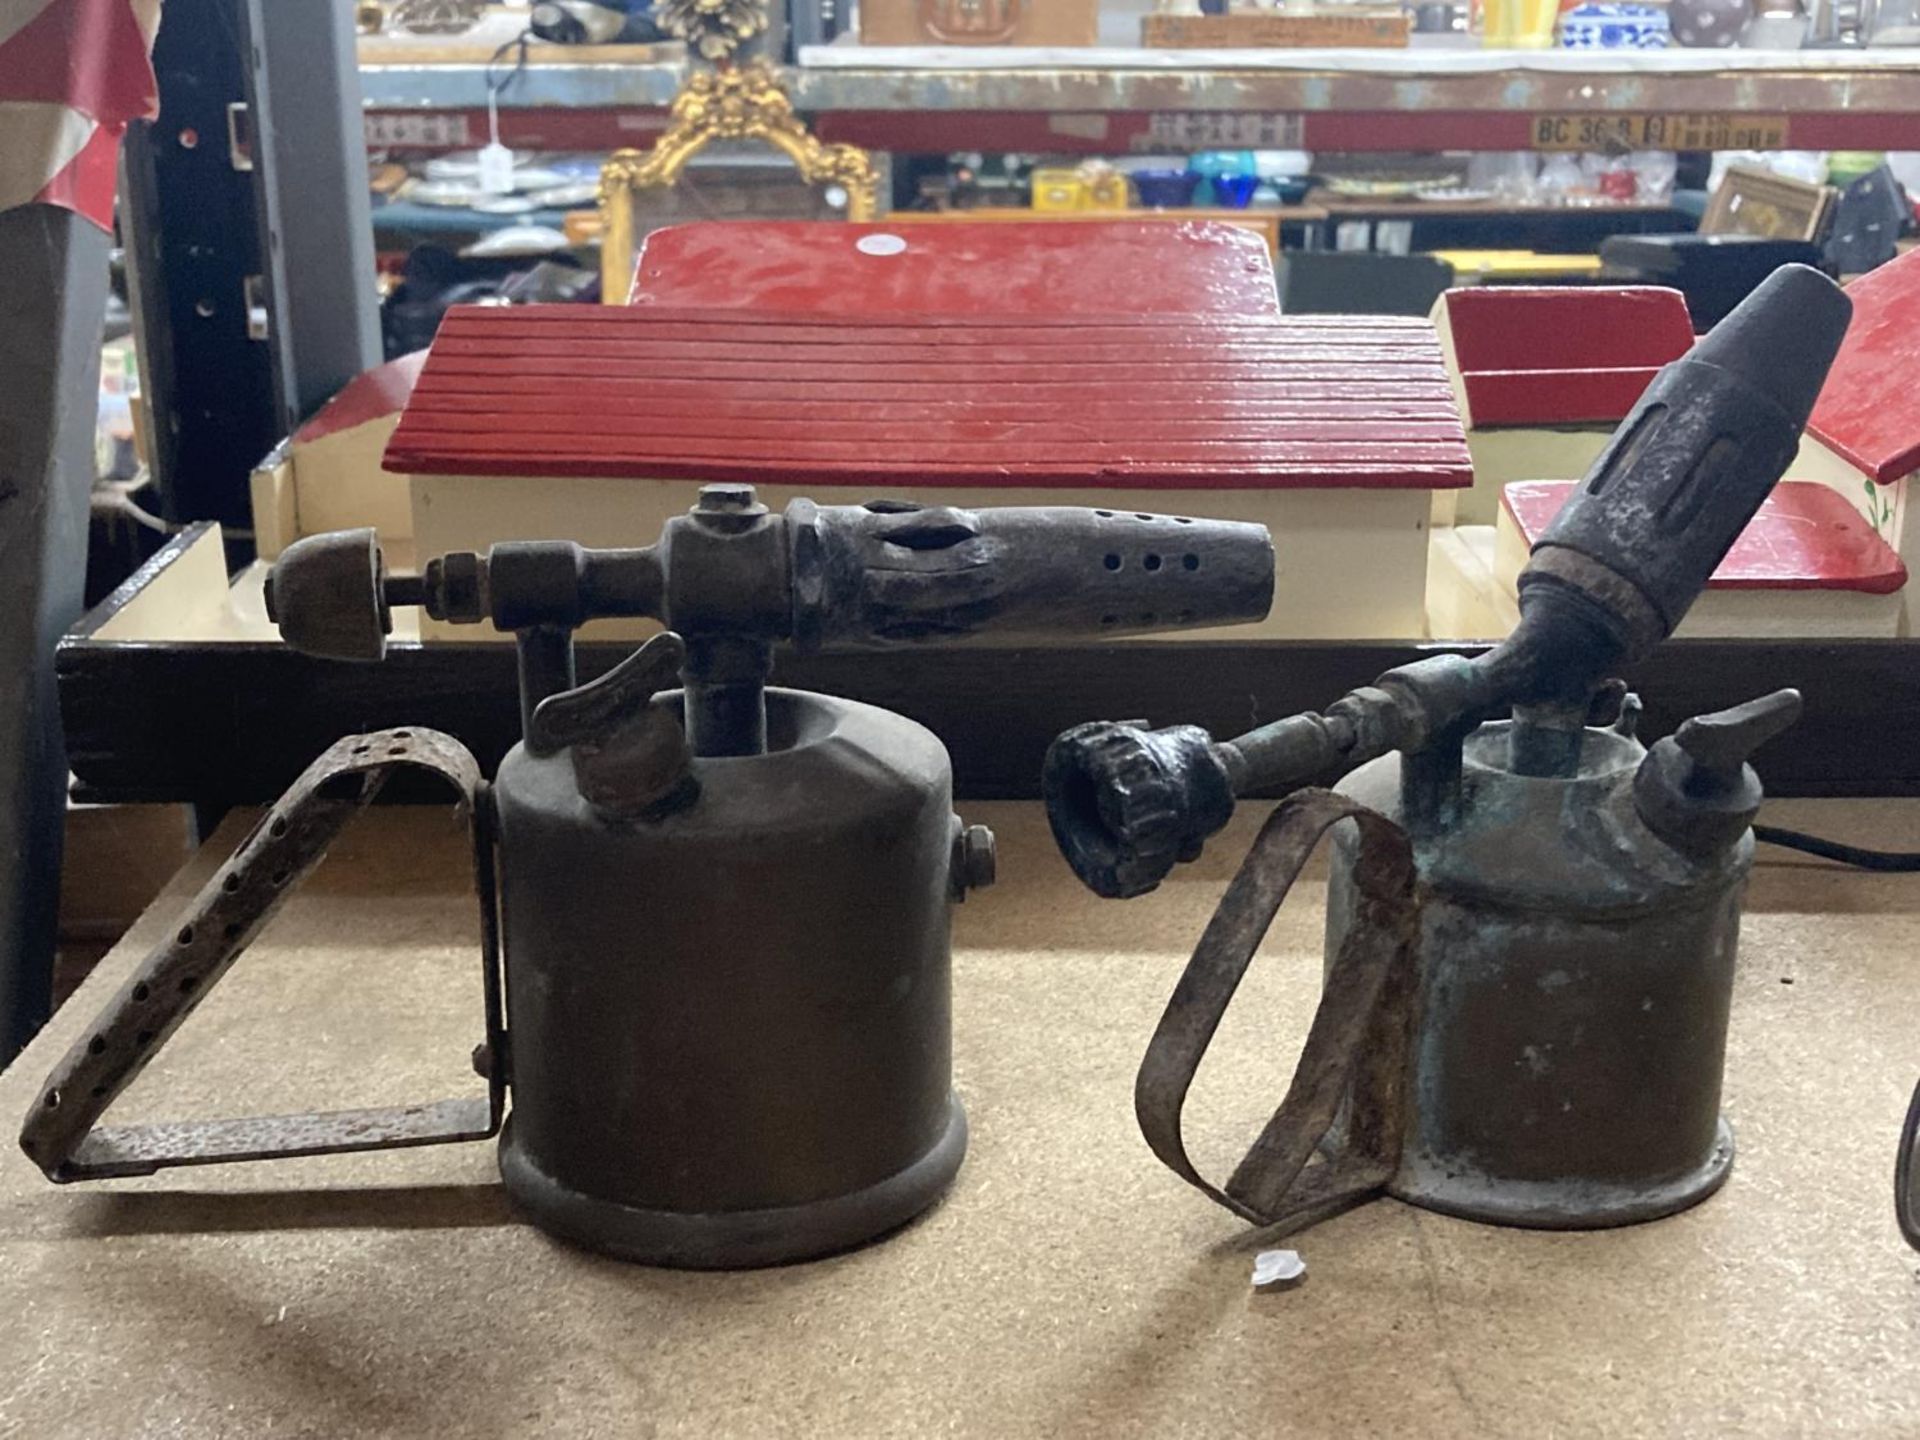 THREE ITEMS TO INCLUDE A VINTAGE FIRE EXTINGUISHER AND TWO BLOW TORCHES - Image 3 of 3